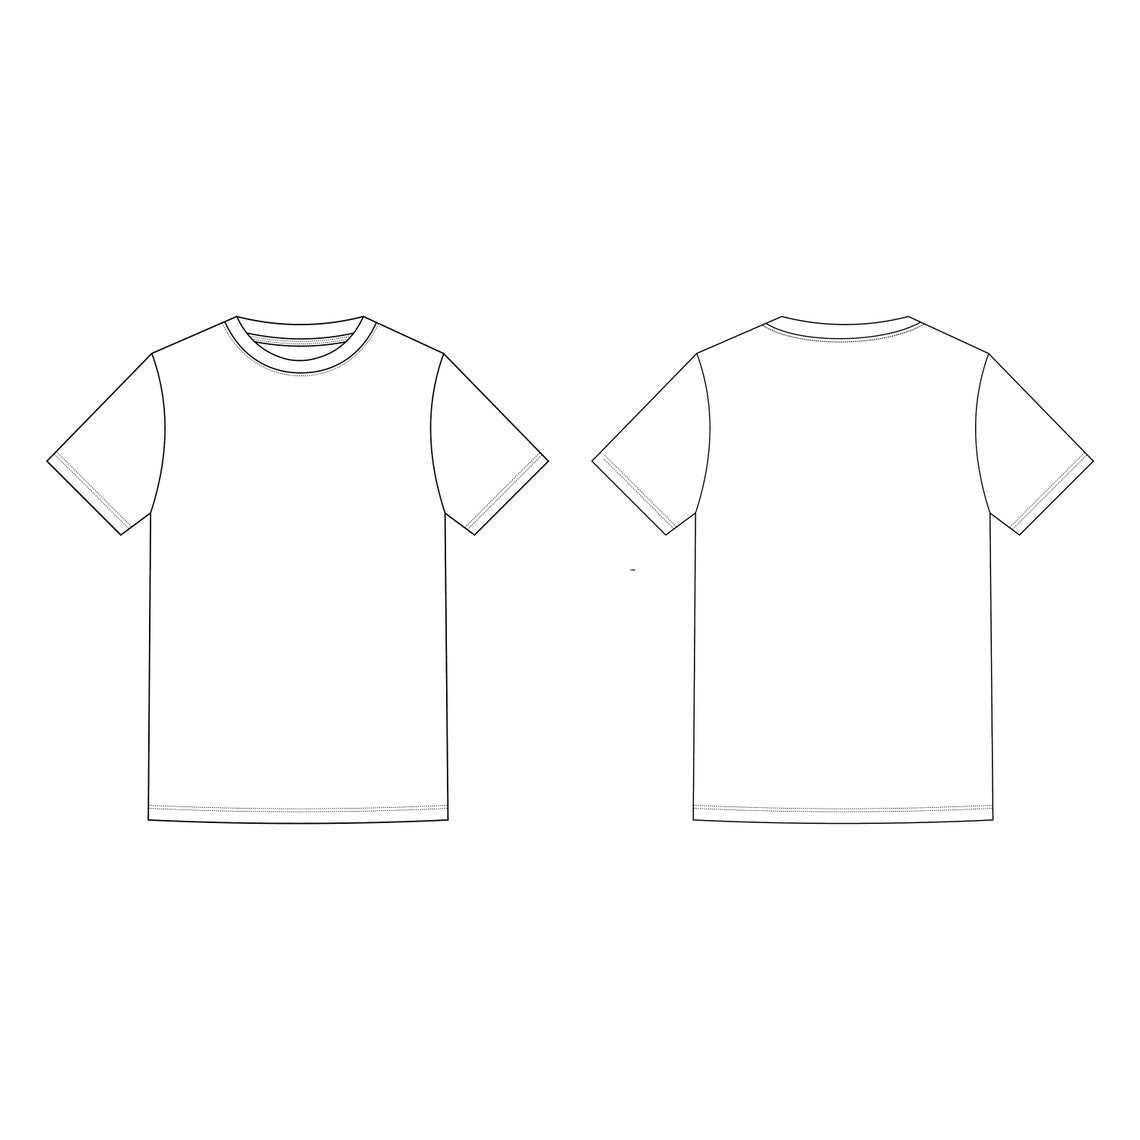 Techpack Layout Template of T-shirt - Etsy Canada